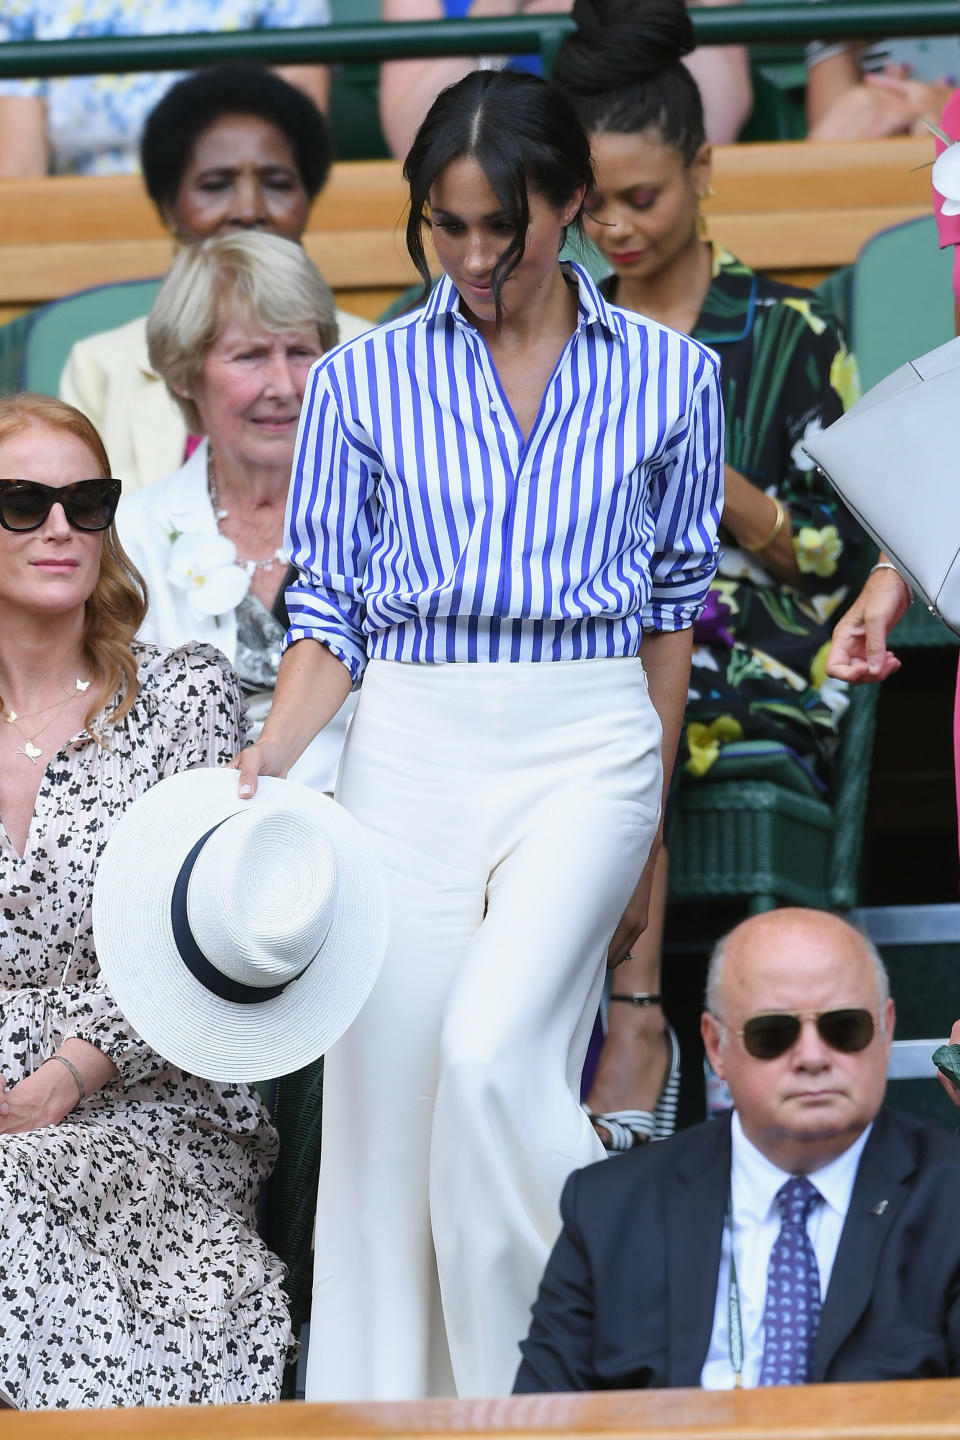 The duchess wore this look when she attended Wimbledon in July. The whole ensemble, complete with white sun hat, looks relaxed yet polished at the same time. It's a great look for brunch or a day out with friends.&nbsp;